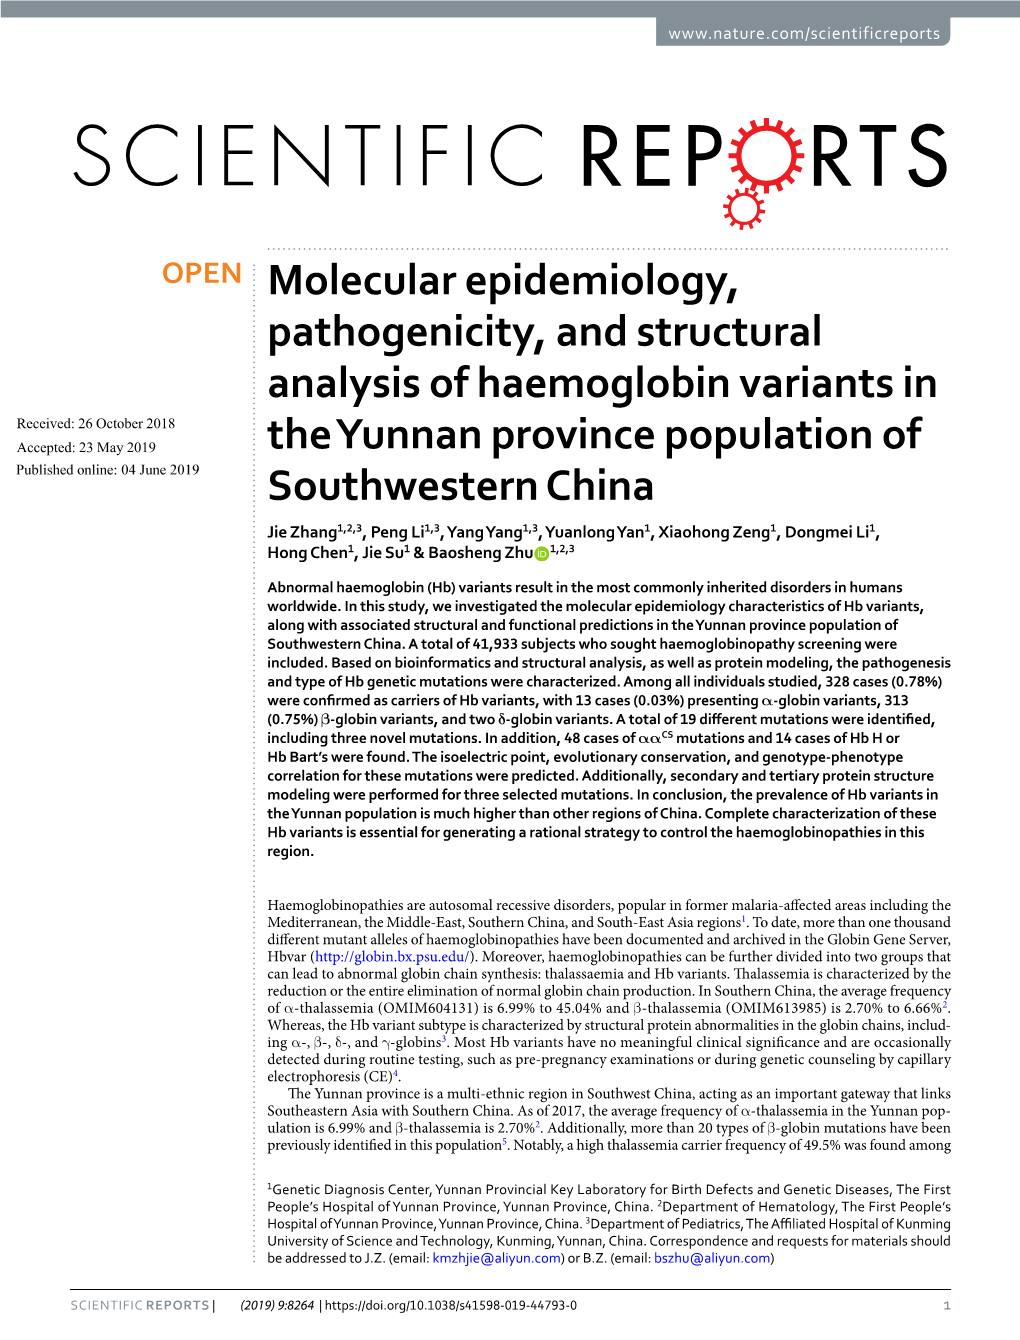 Molecular Epidemiology, Pathogenicity, and Structural Analysis of Haemoglobin Variants in the Yunnan Province Population of Sout